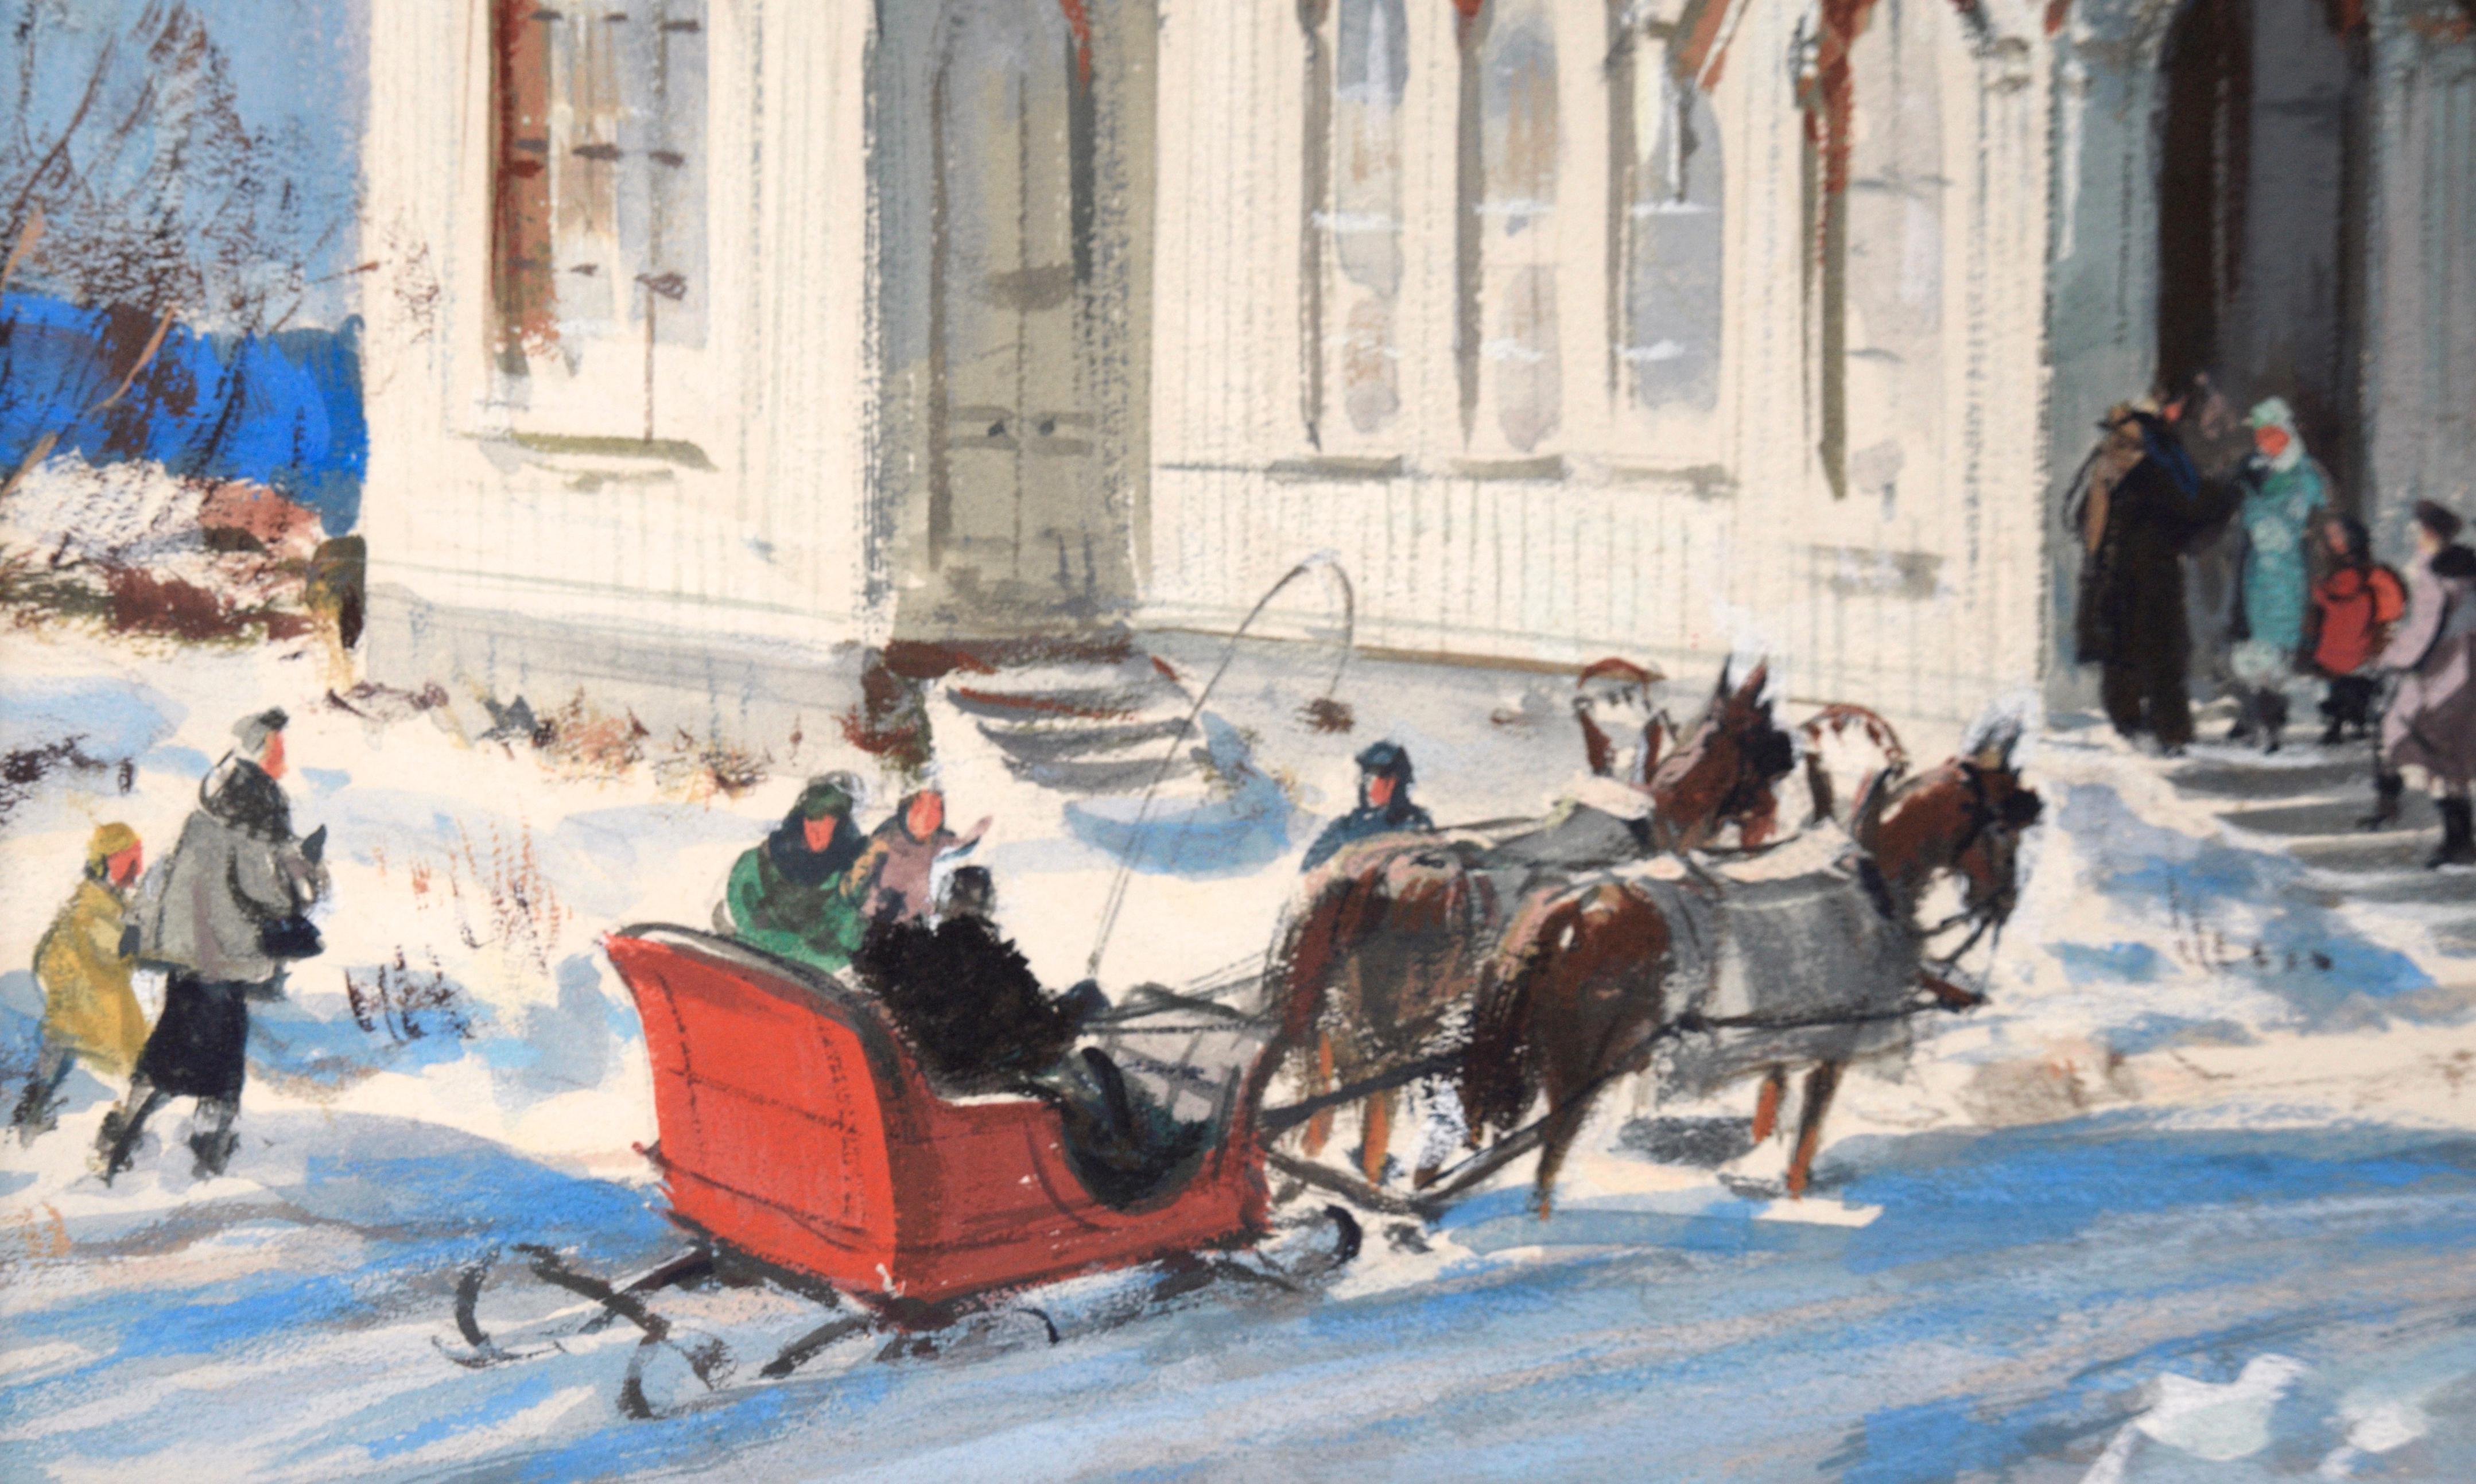 Figurative illustration of people arriving at a church by Charles Kinghan (American, 1895-1984). The church is rendered with exquisite detail, typical of Kinghan's style. People are walking towards an ornate church, dressed in heavy winter clothes.